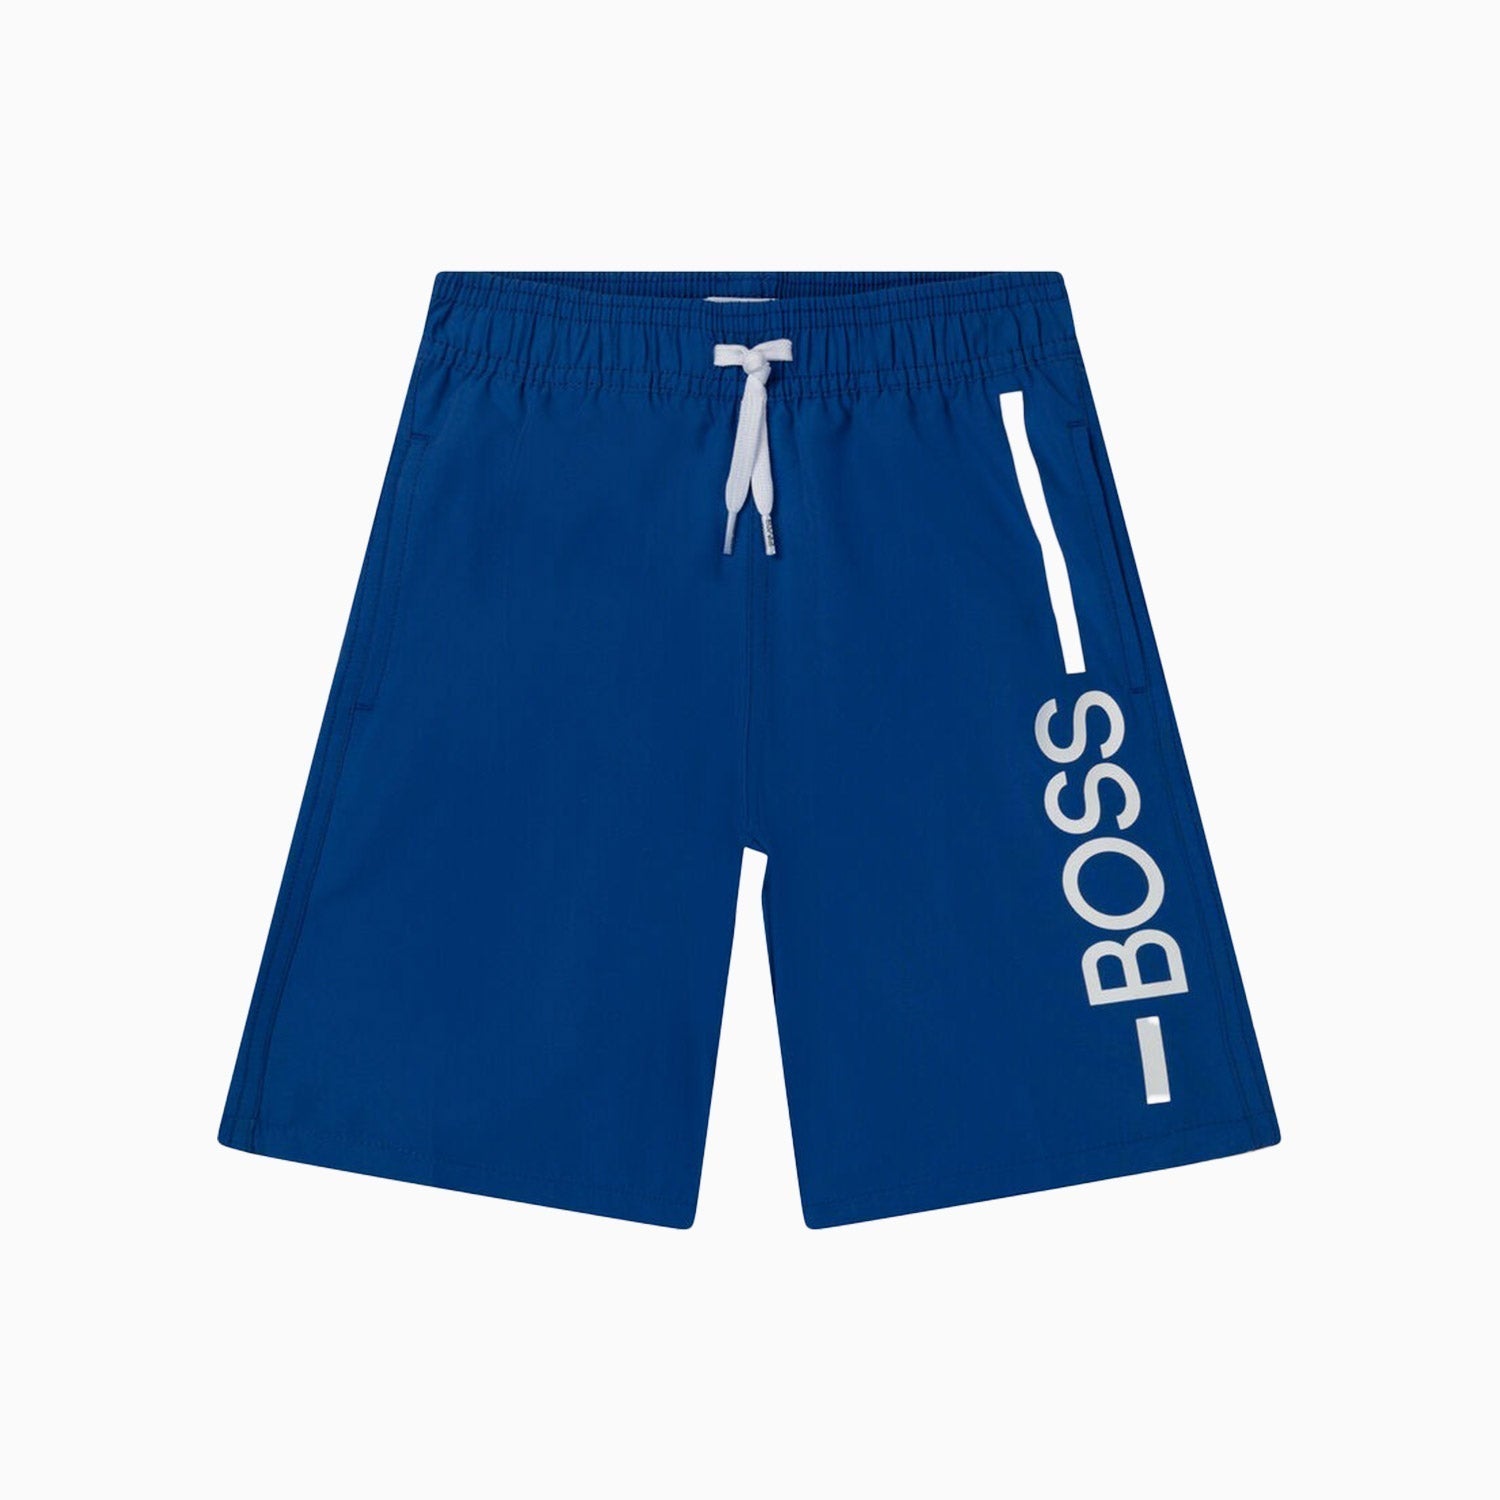 Hugo Boss Kid's Surfer Outfit - Color: Navy, Yellow, Electric Blue, Green, Red - Kids Premium Clothing -